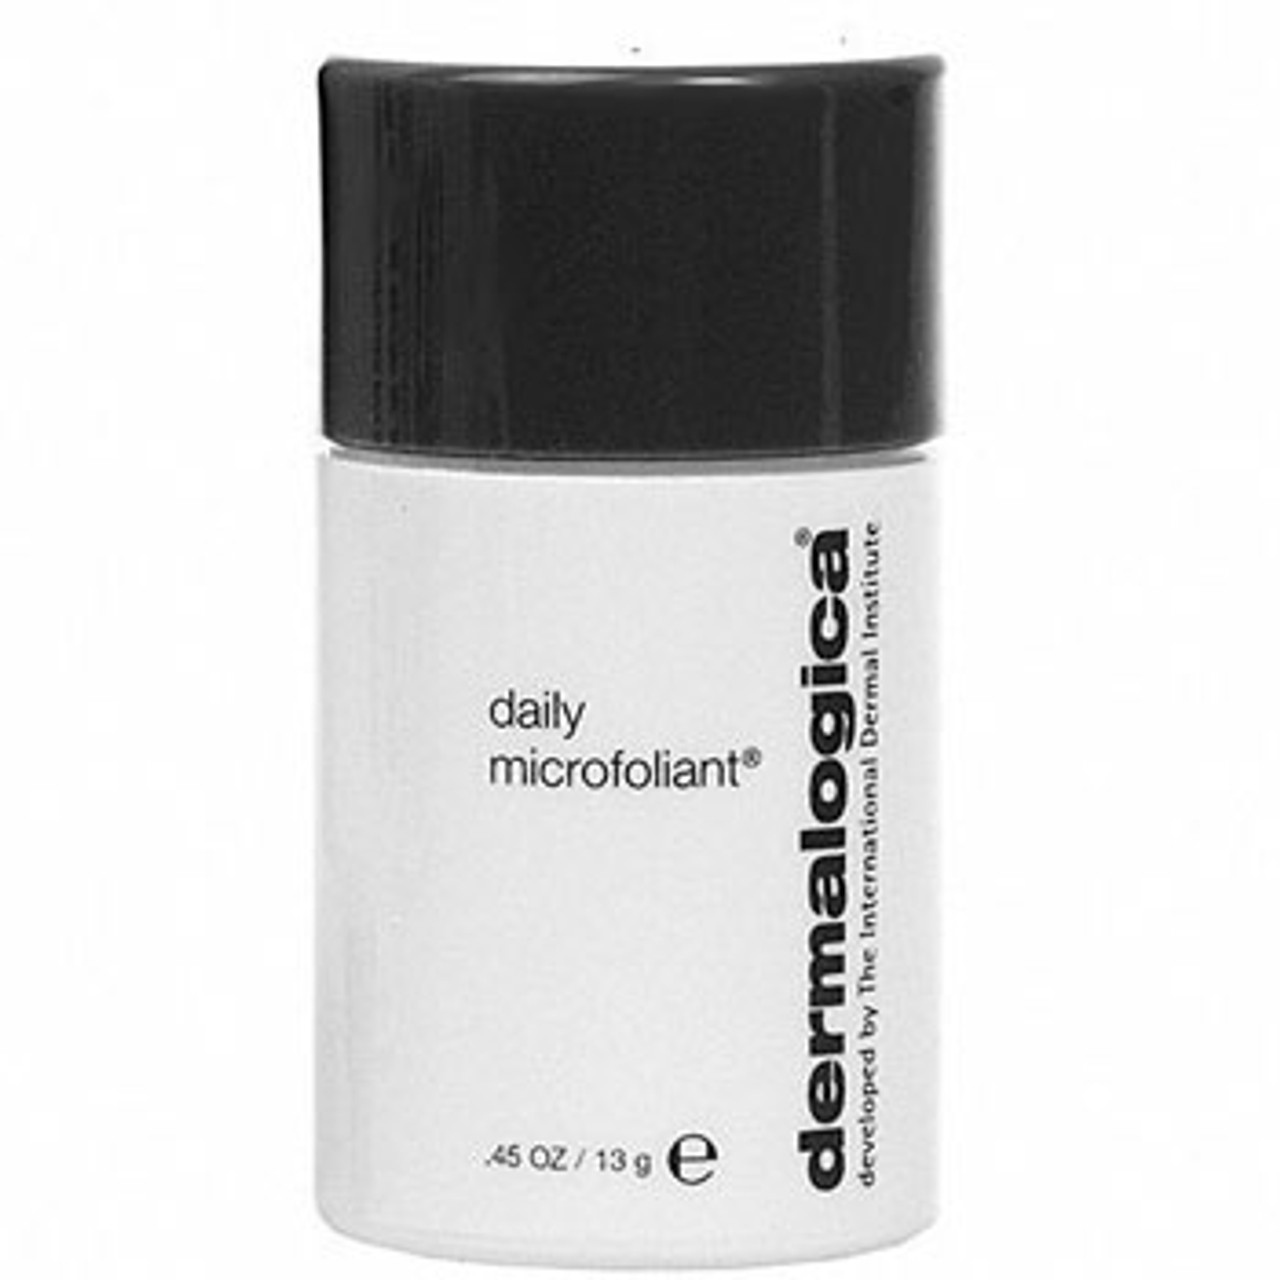 Dermalogica Daily Microfoliant - Travel Size - Free with $35 Purchase